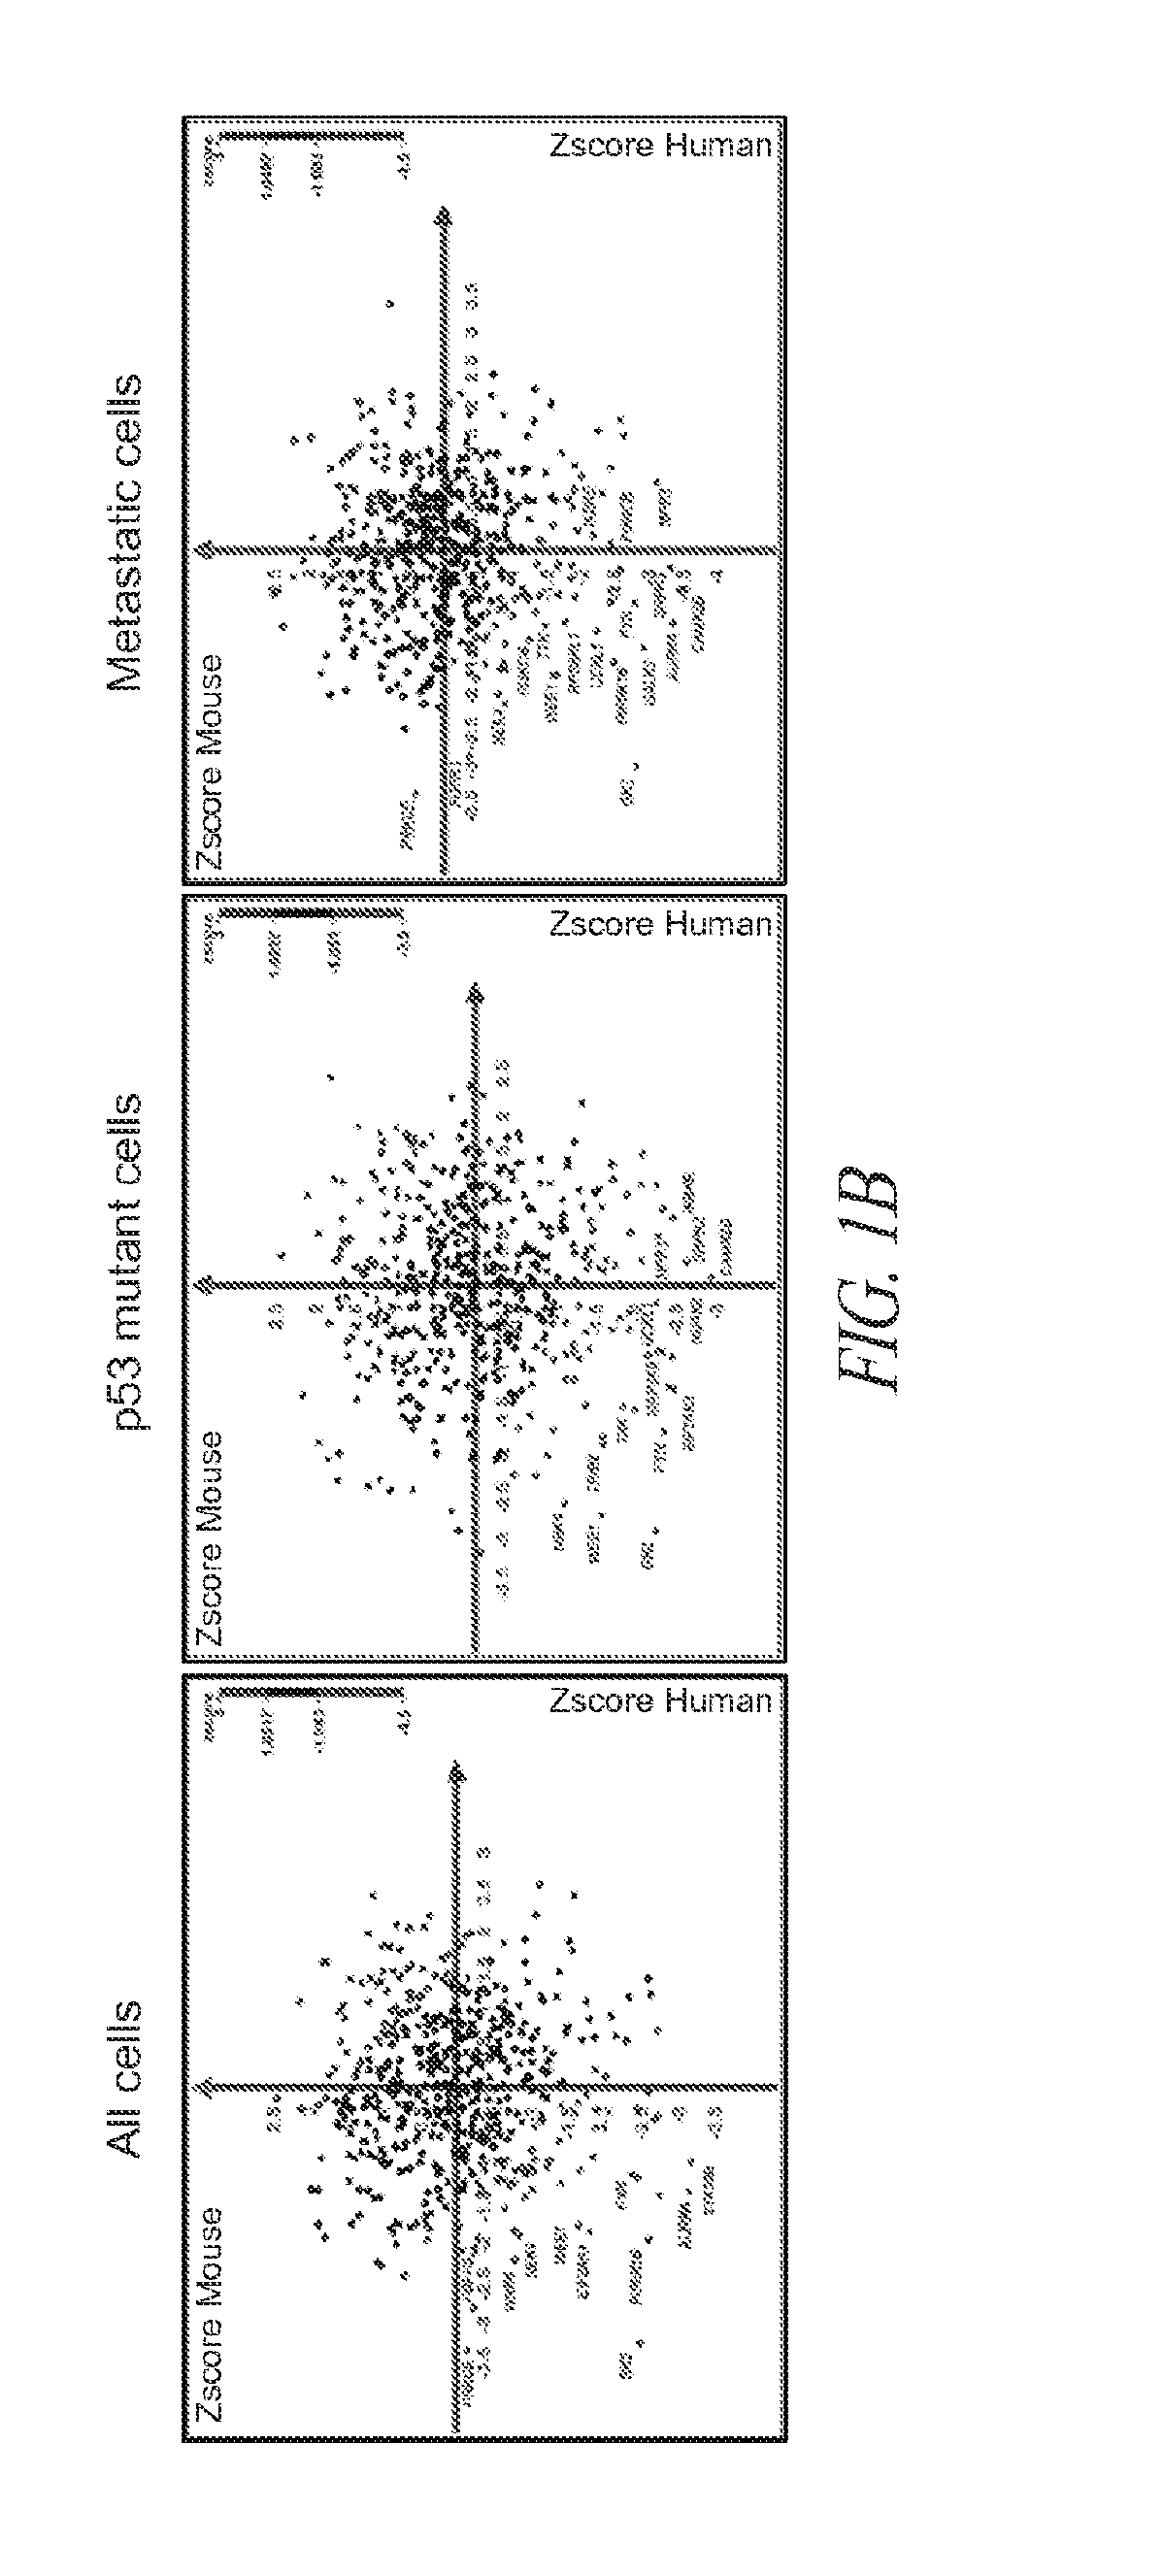 Methods for identifying therapeutic targets and treating monitoring cancers